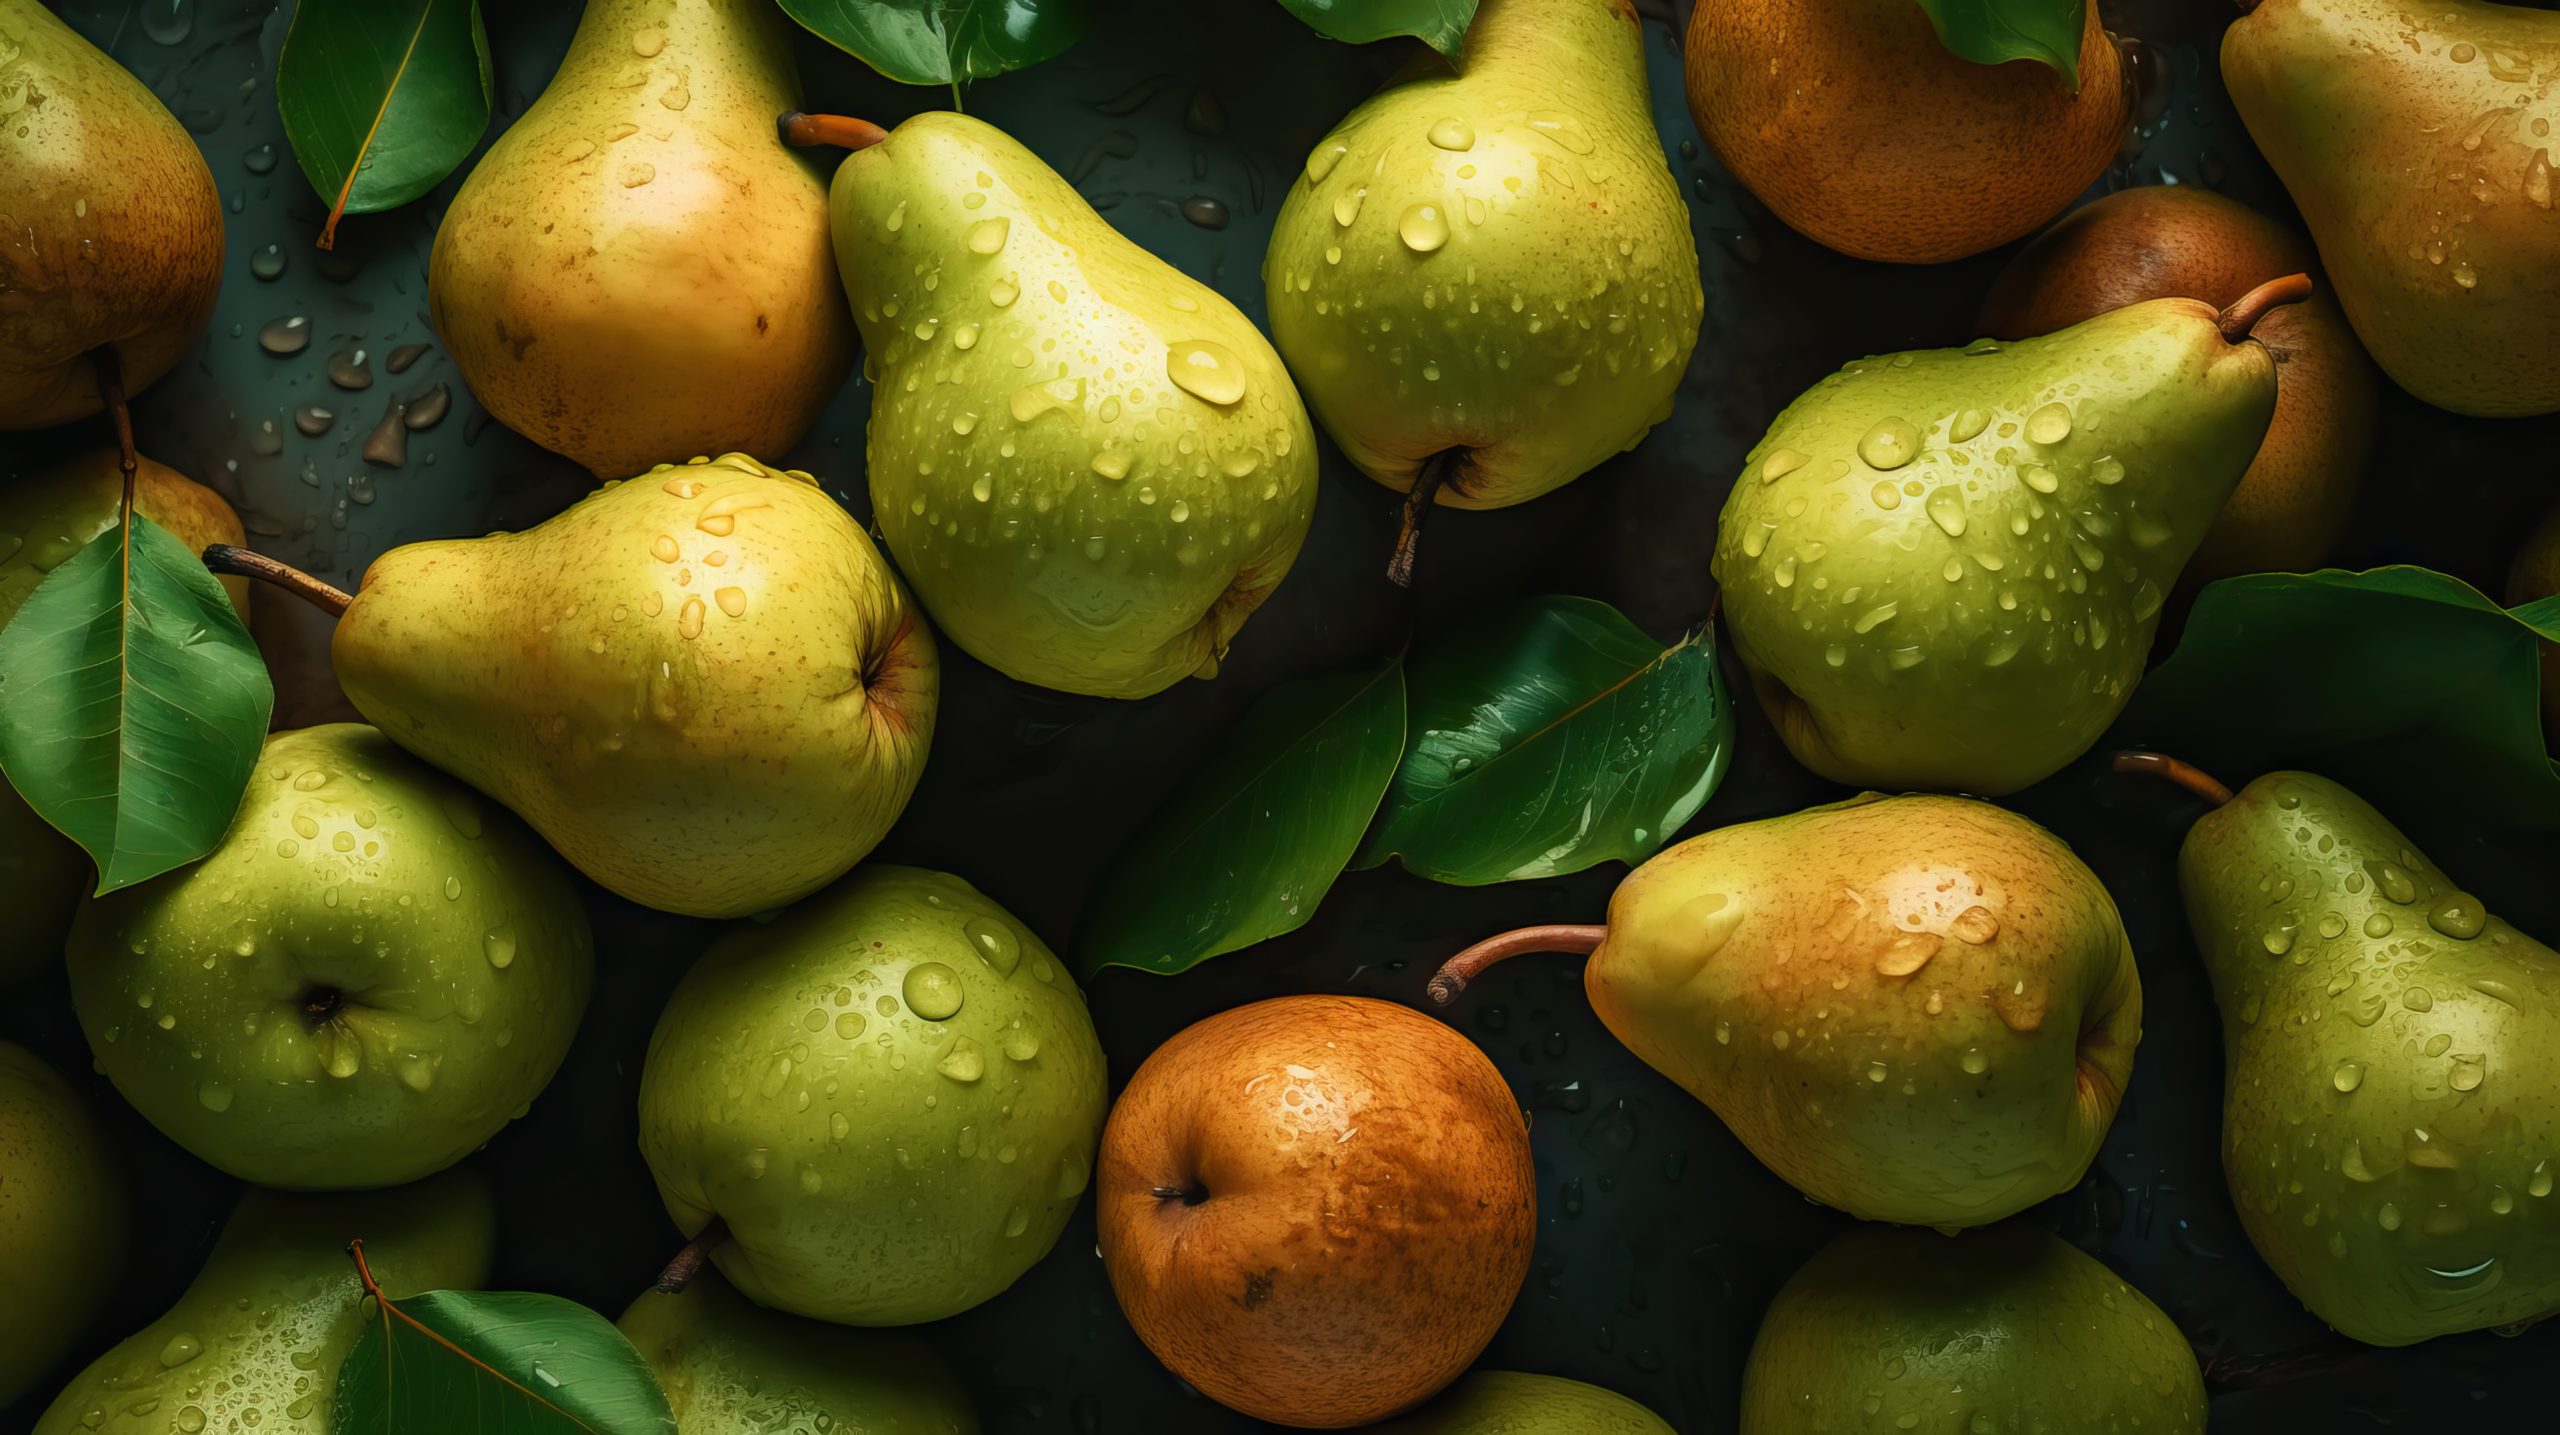 The pear, a fruit with sweet flavor and extraordinary nutritional properties